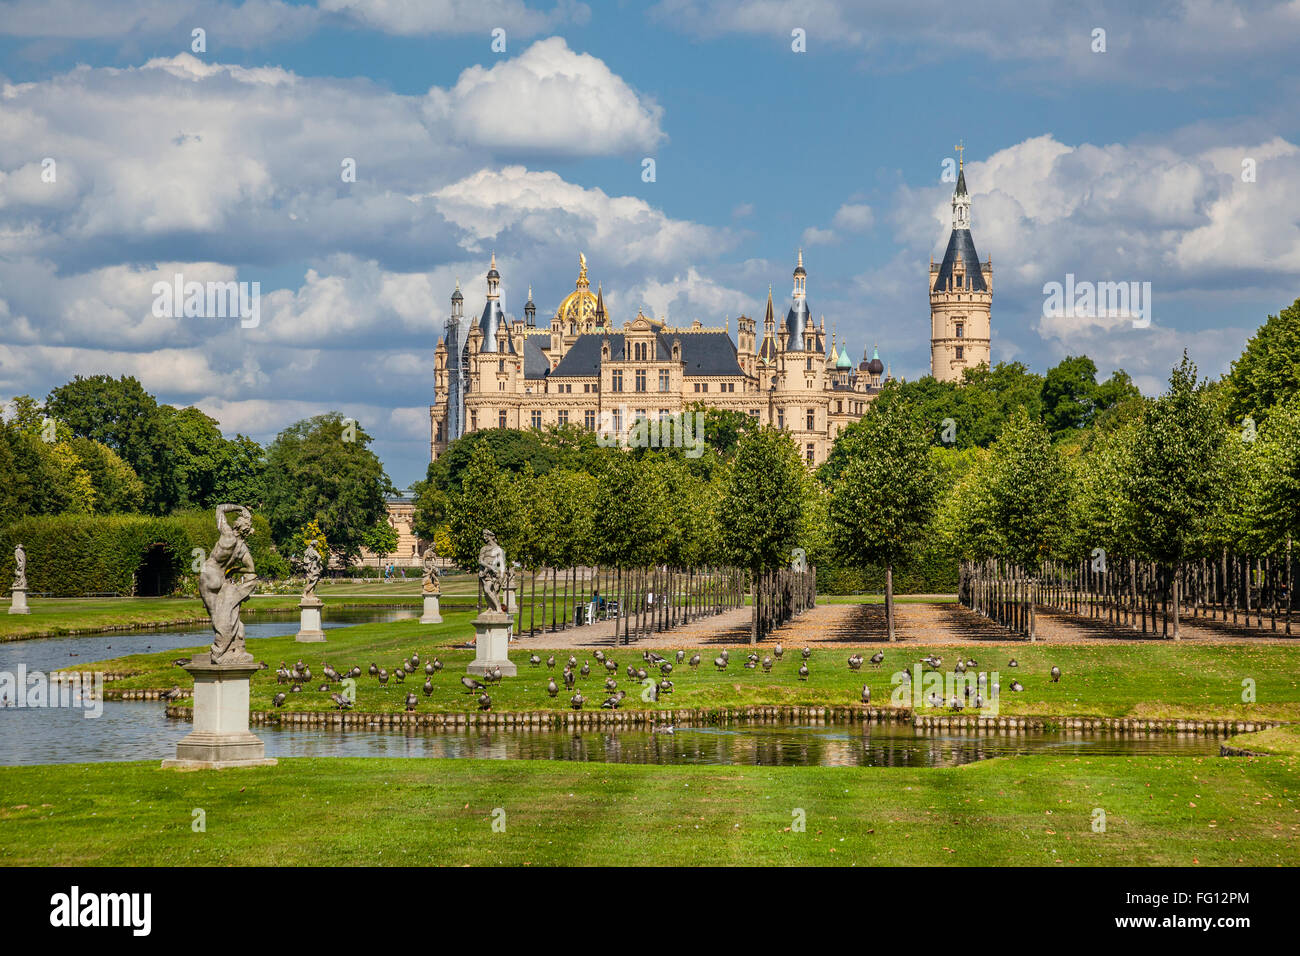 Germany, Mecklenburg-Vorpommern, Schwerin Palace, view of the Palace Gardens with sculptures by Baltasar Permoser (1675 - 1713) Stock Photo